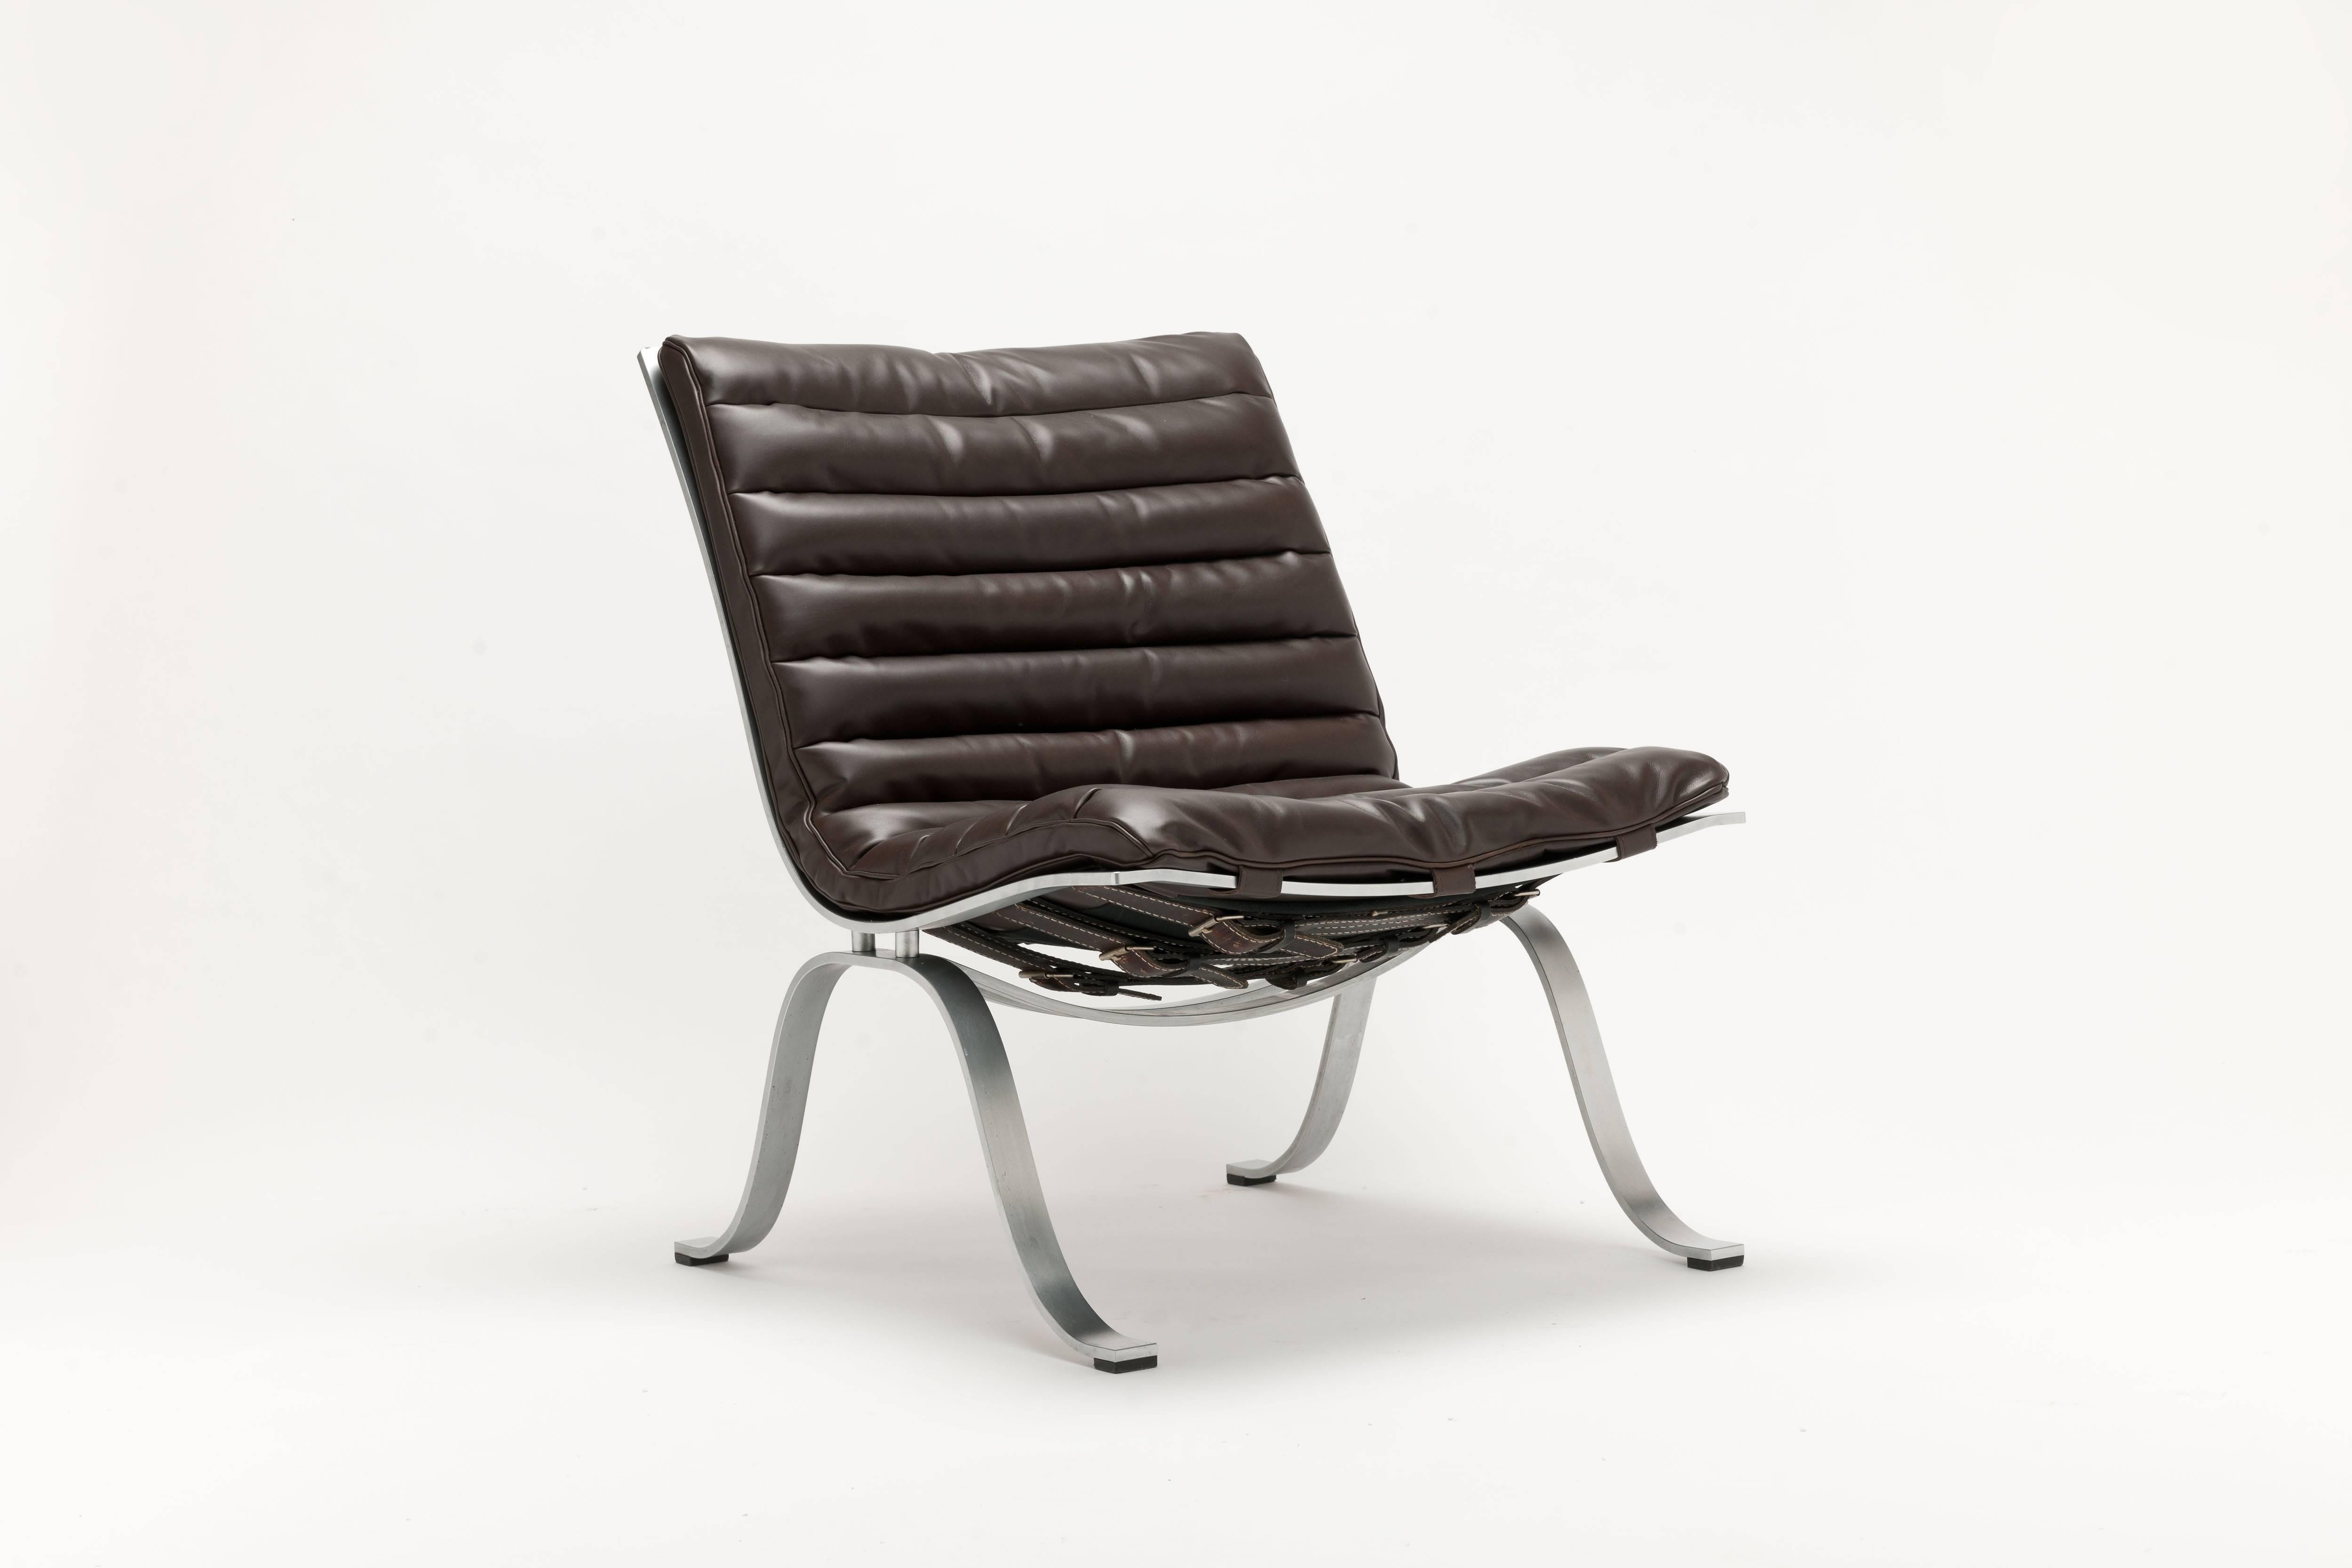 Dark brown leather Ariet Lounge chairs by Swedish designer Arne Norell, designed in 1968.  Manufactured by Norell Möbel, AB
These chairs date from the early 1970s and come with a matte chromed frame and their original vintage belts and buckles. A